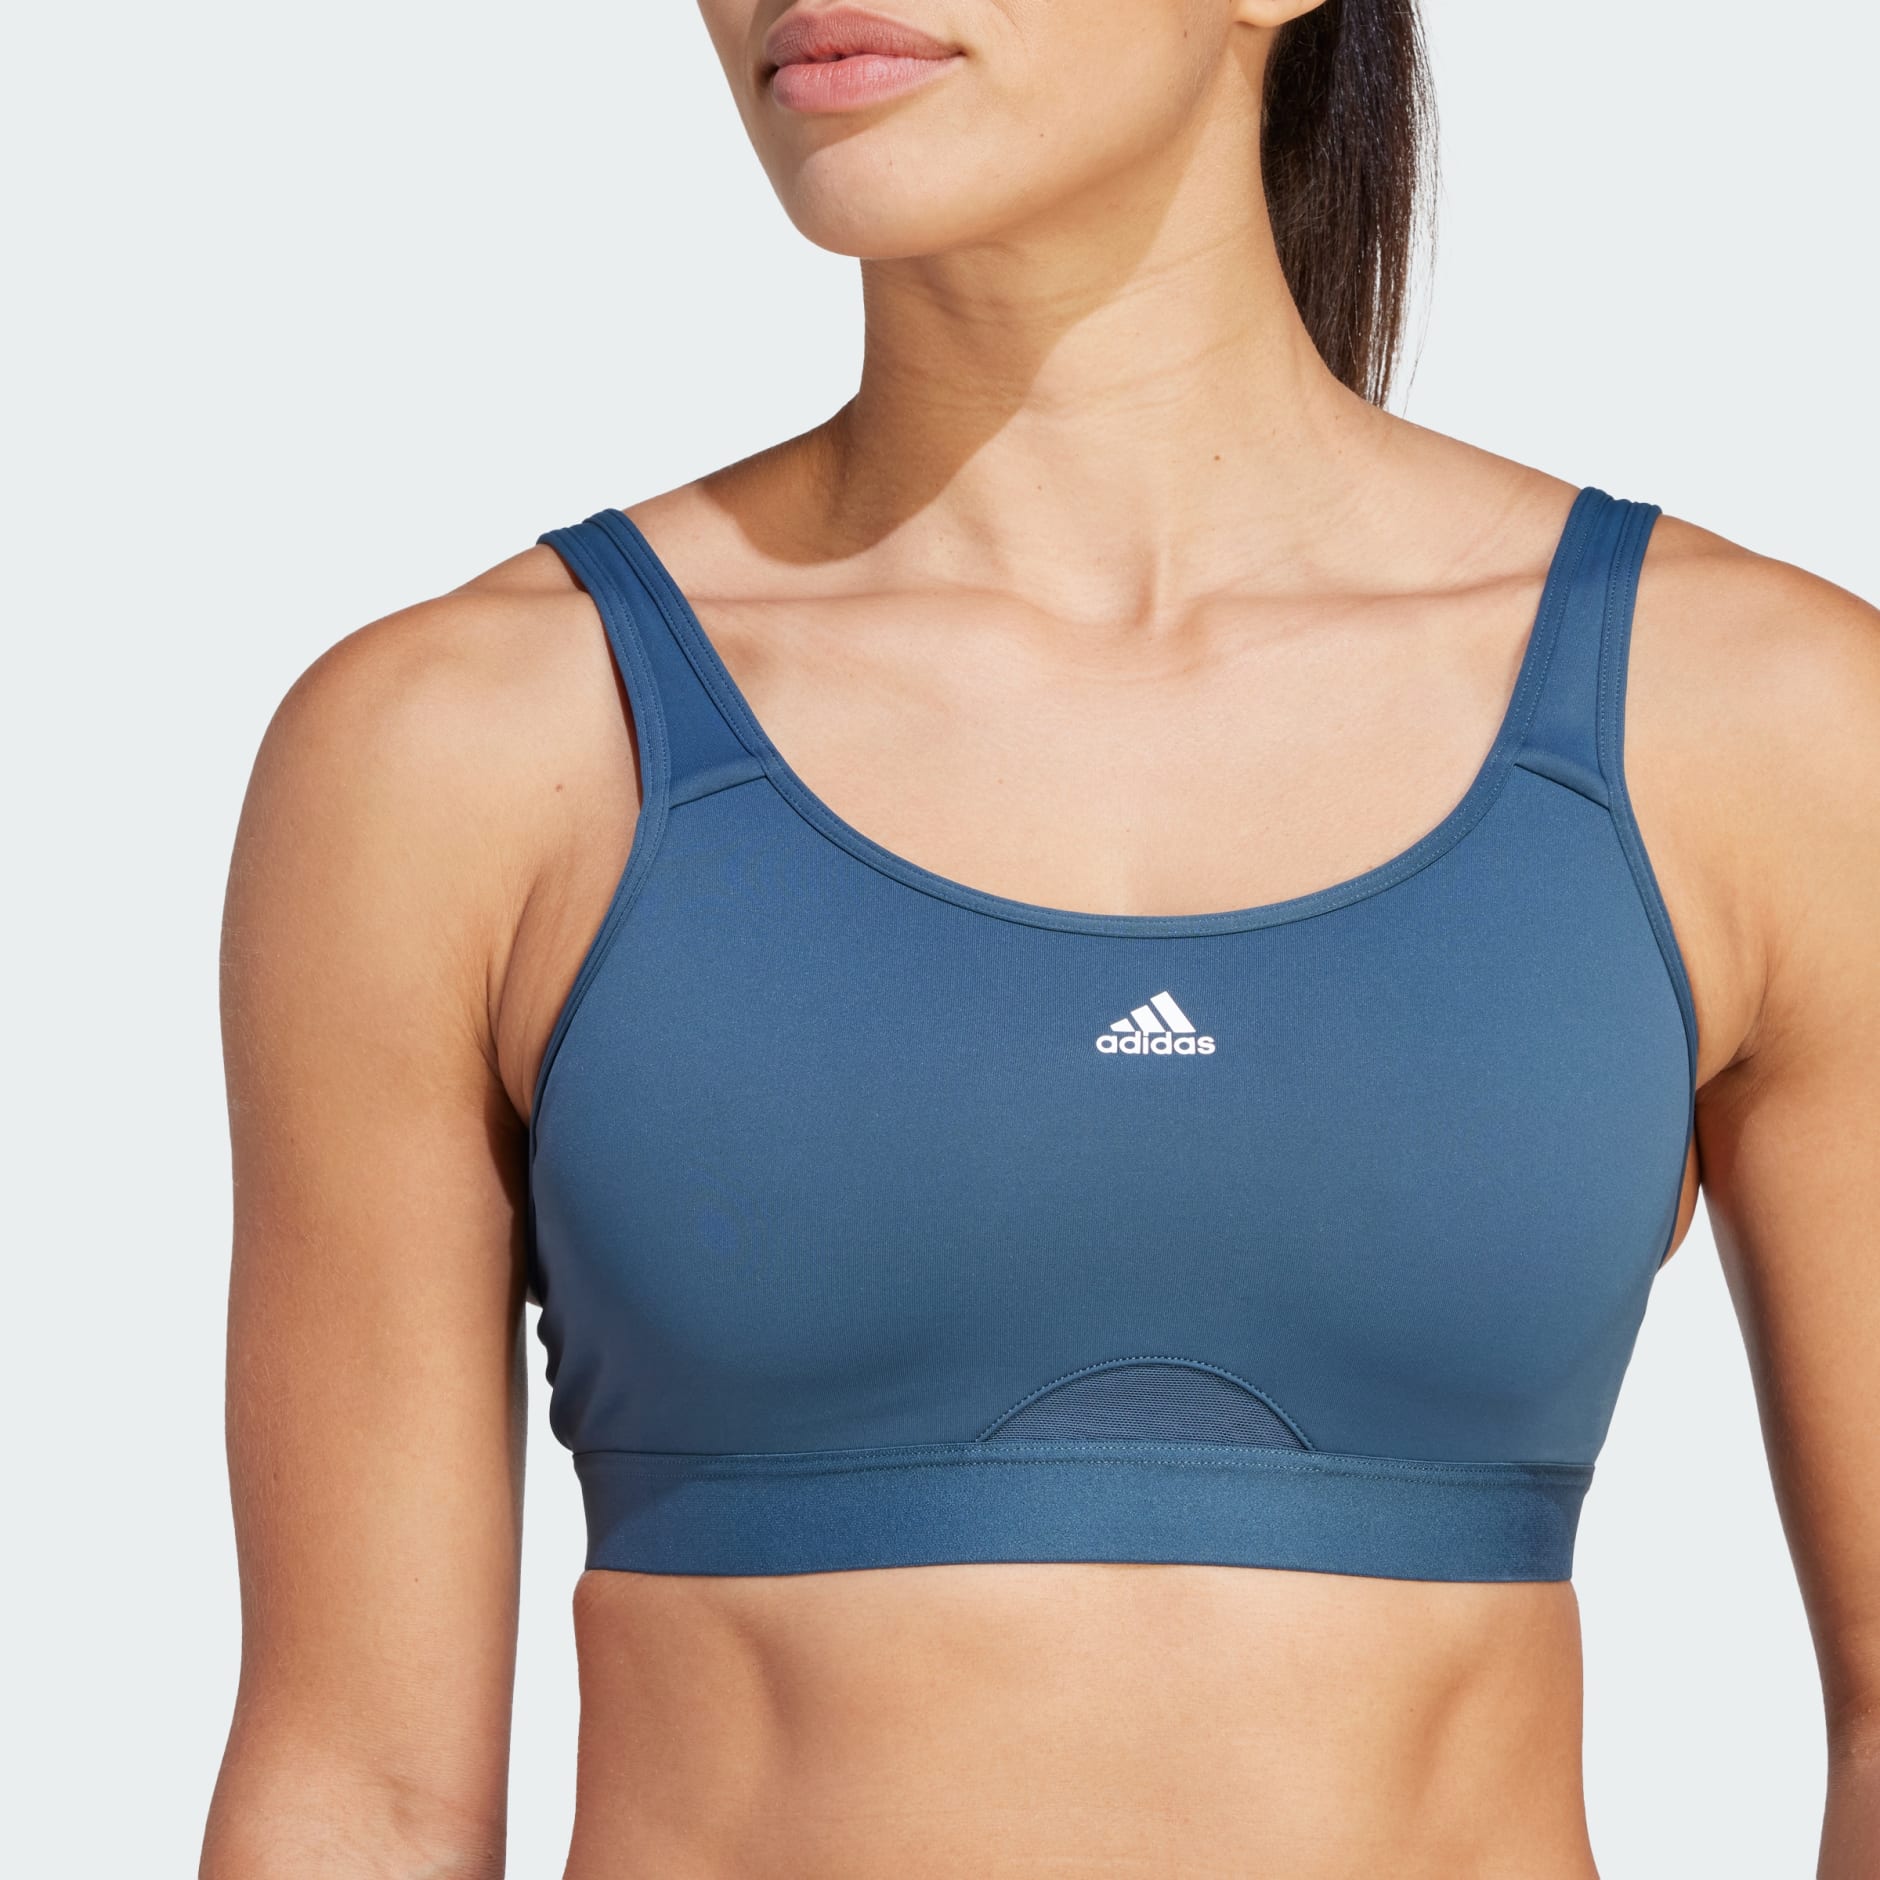 Turns out bras don't have to feel like a medieval torture device